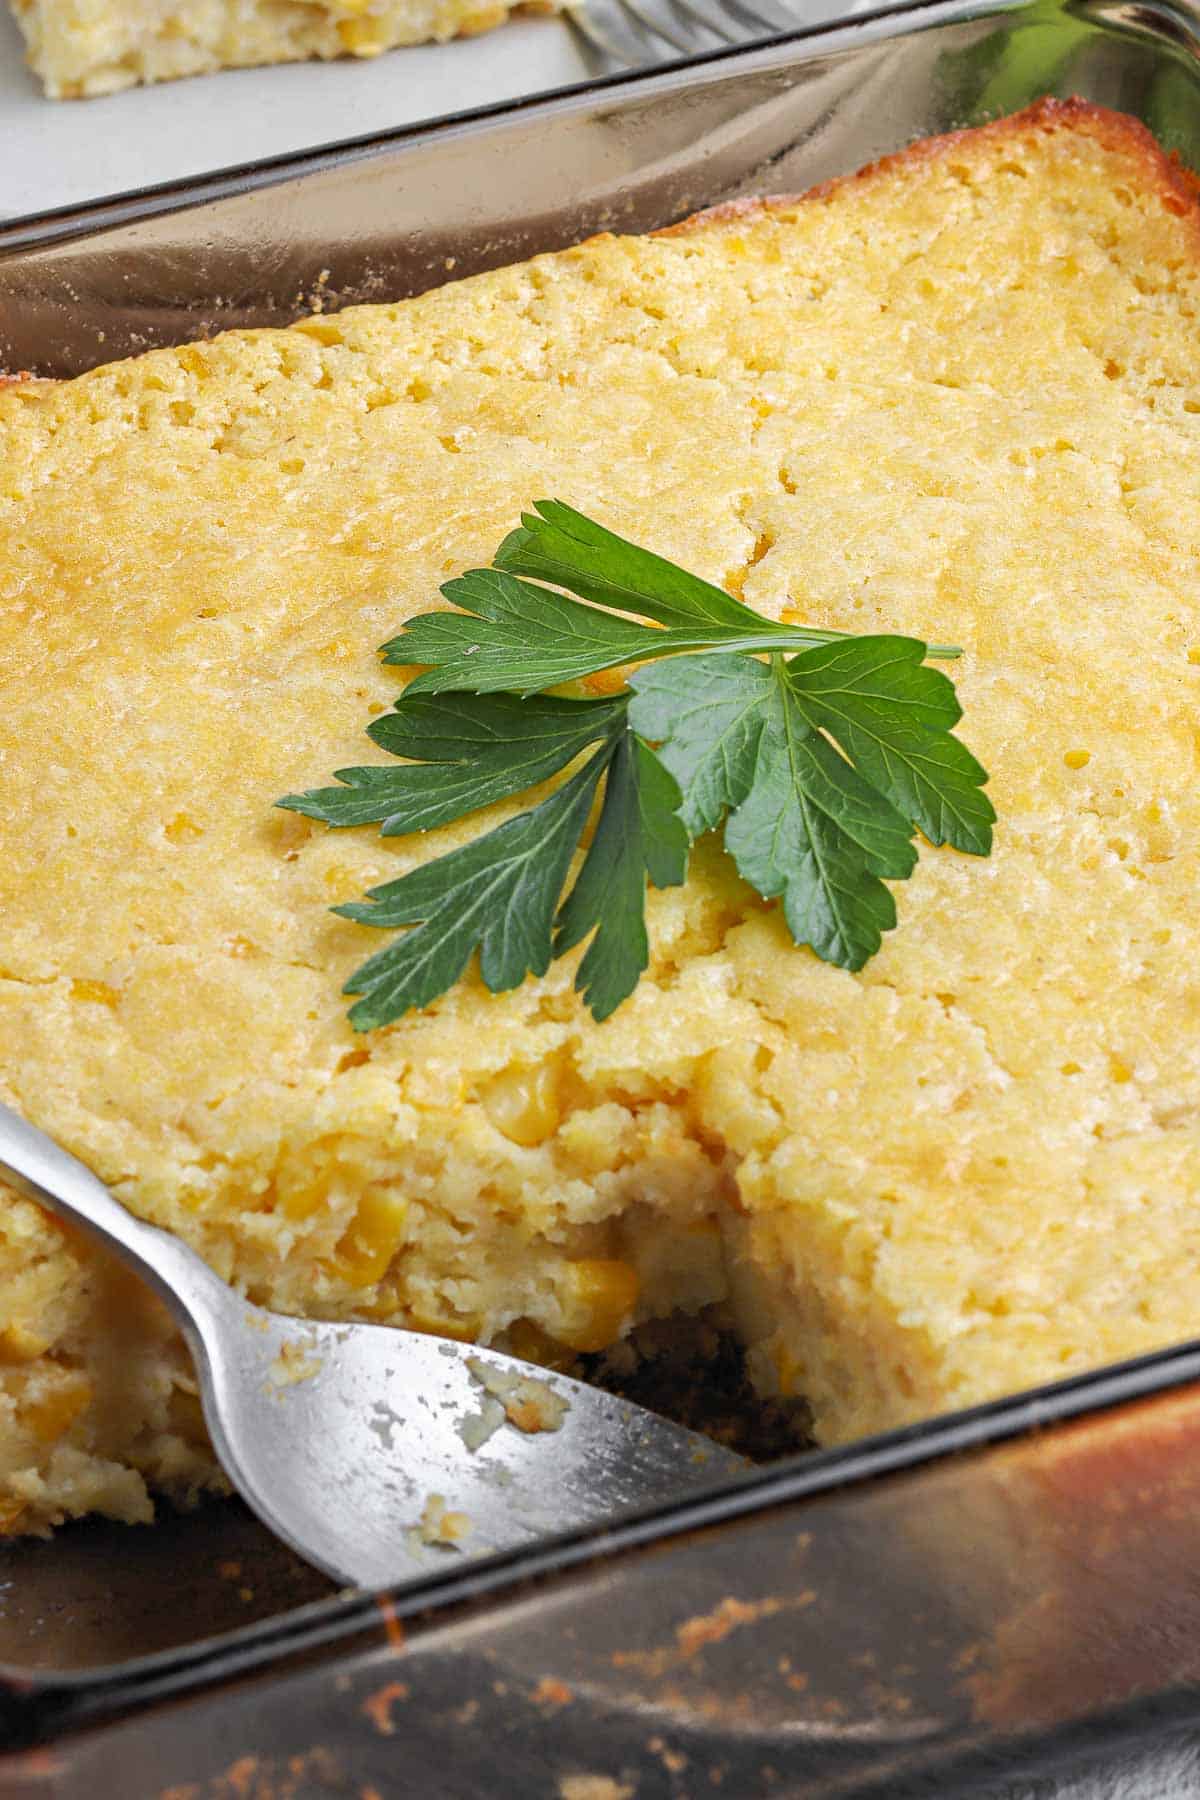 Corn casserole in a baking dish with a slice removed.